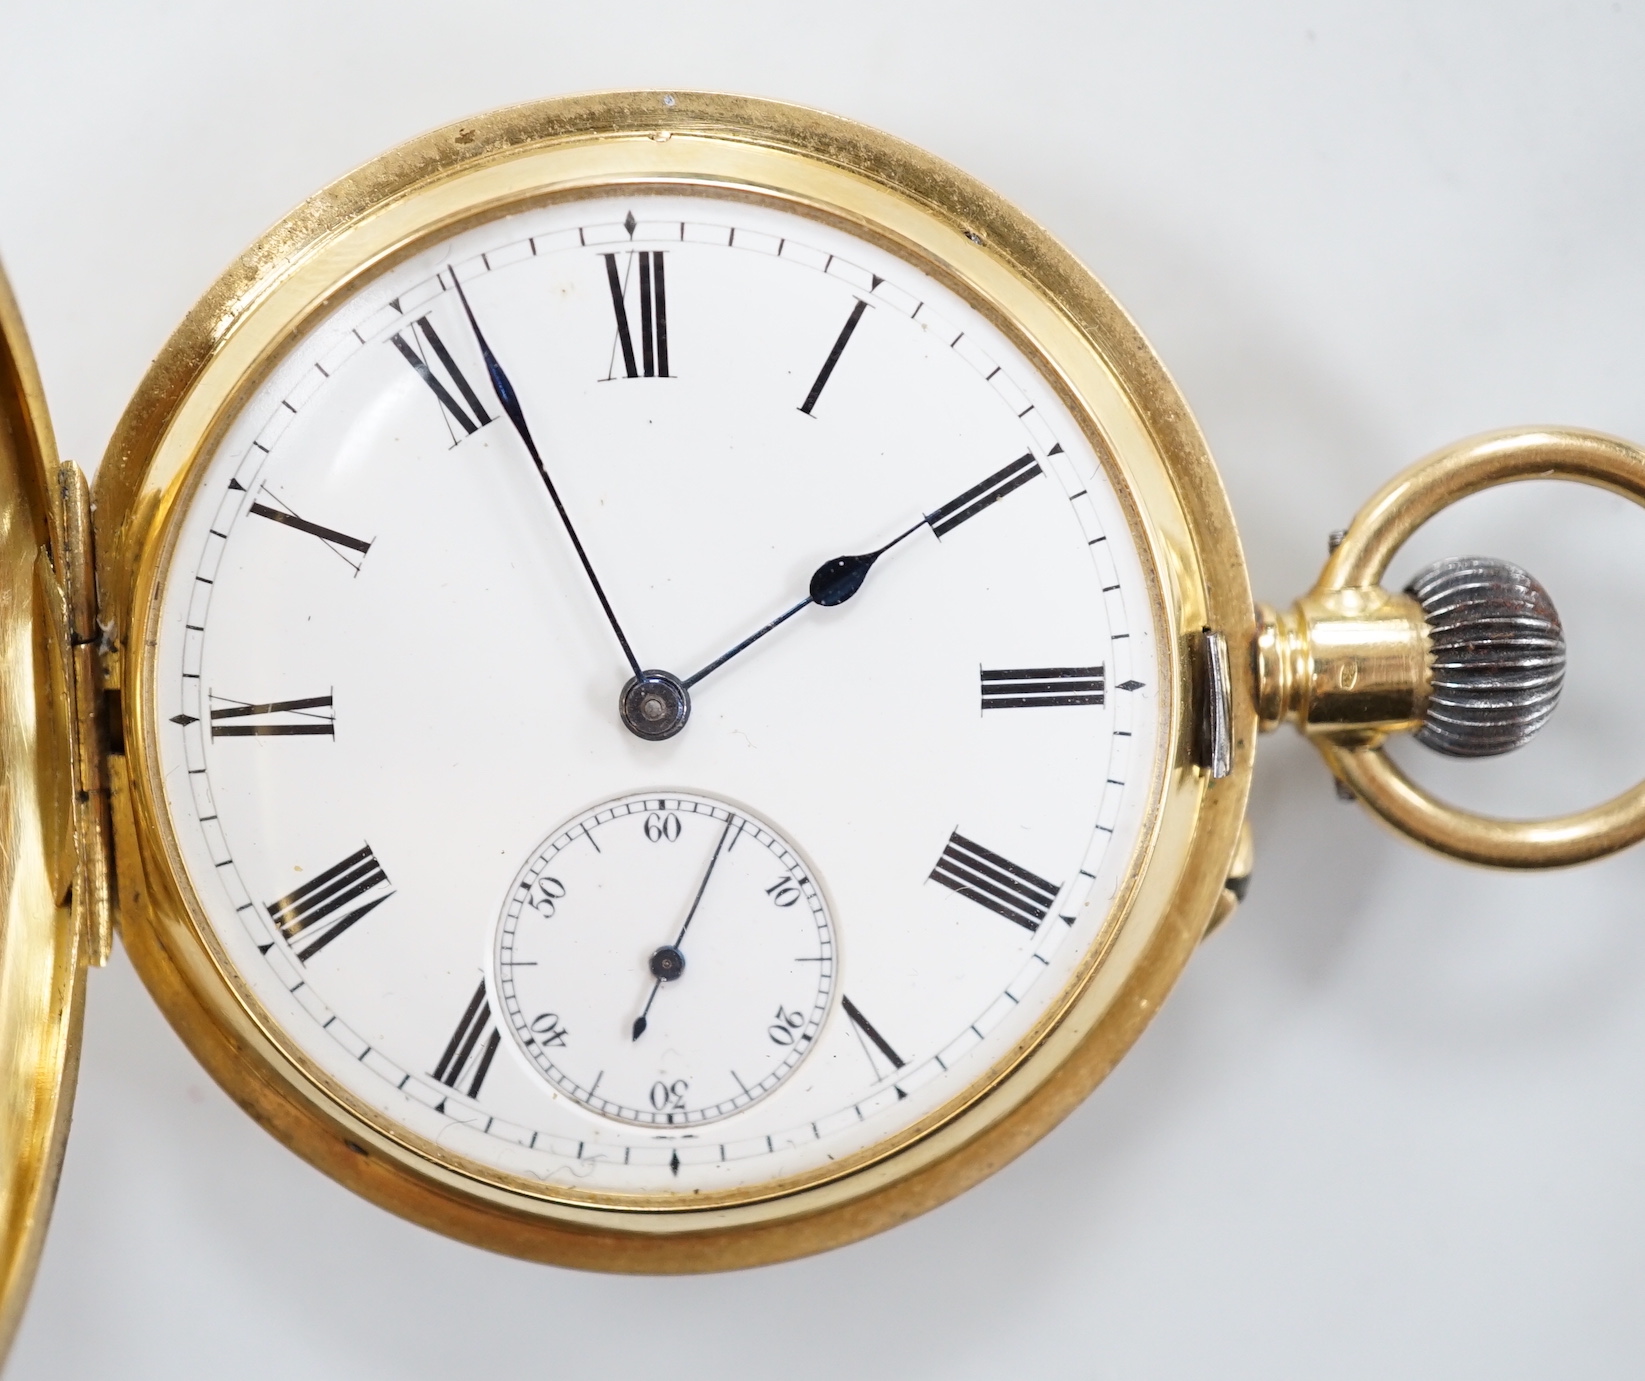 A continental 18c hunter keyless pocket watch, with Roman dial and subsidiary seconds, case diameter 50mm, gross weight 101.4 grams.